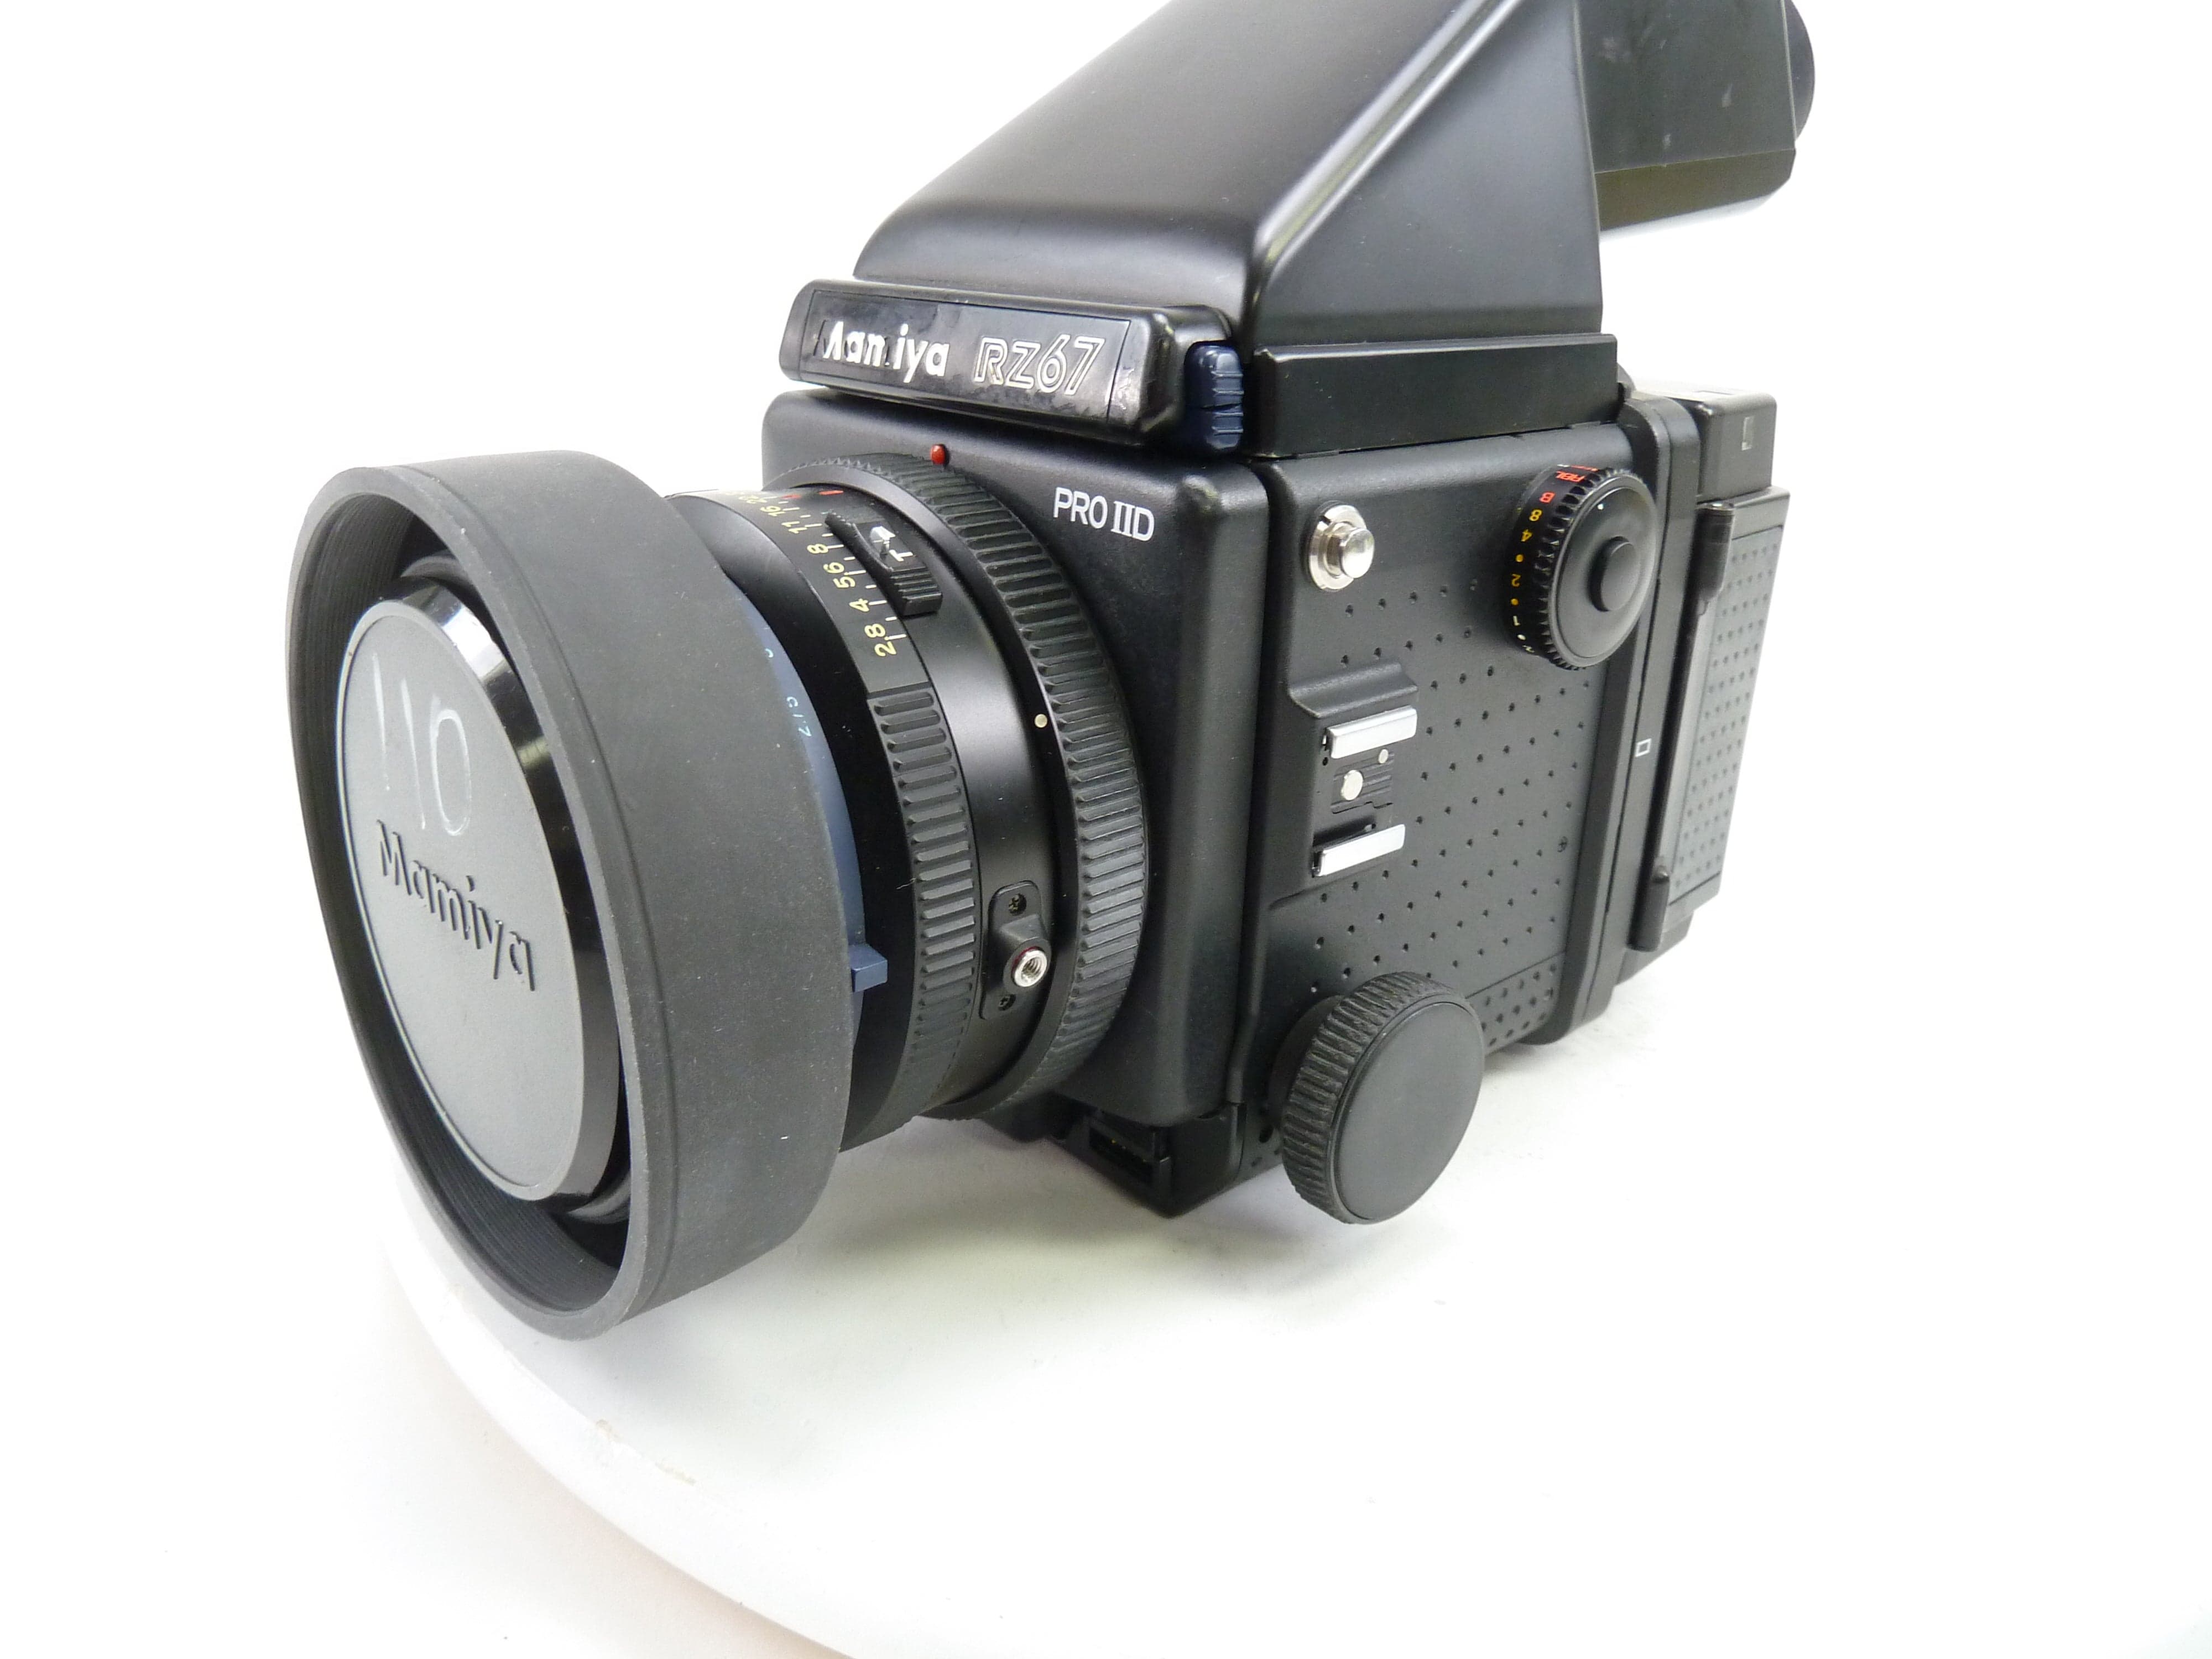 Mamiya RZ67 Pro IID Camera Outfit with the Pro II AE Prism and 